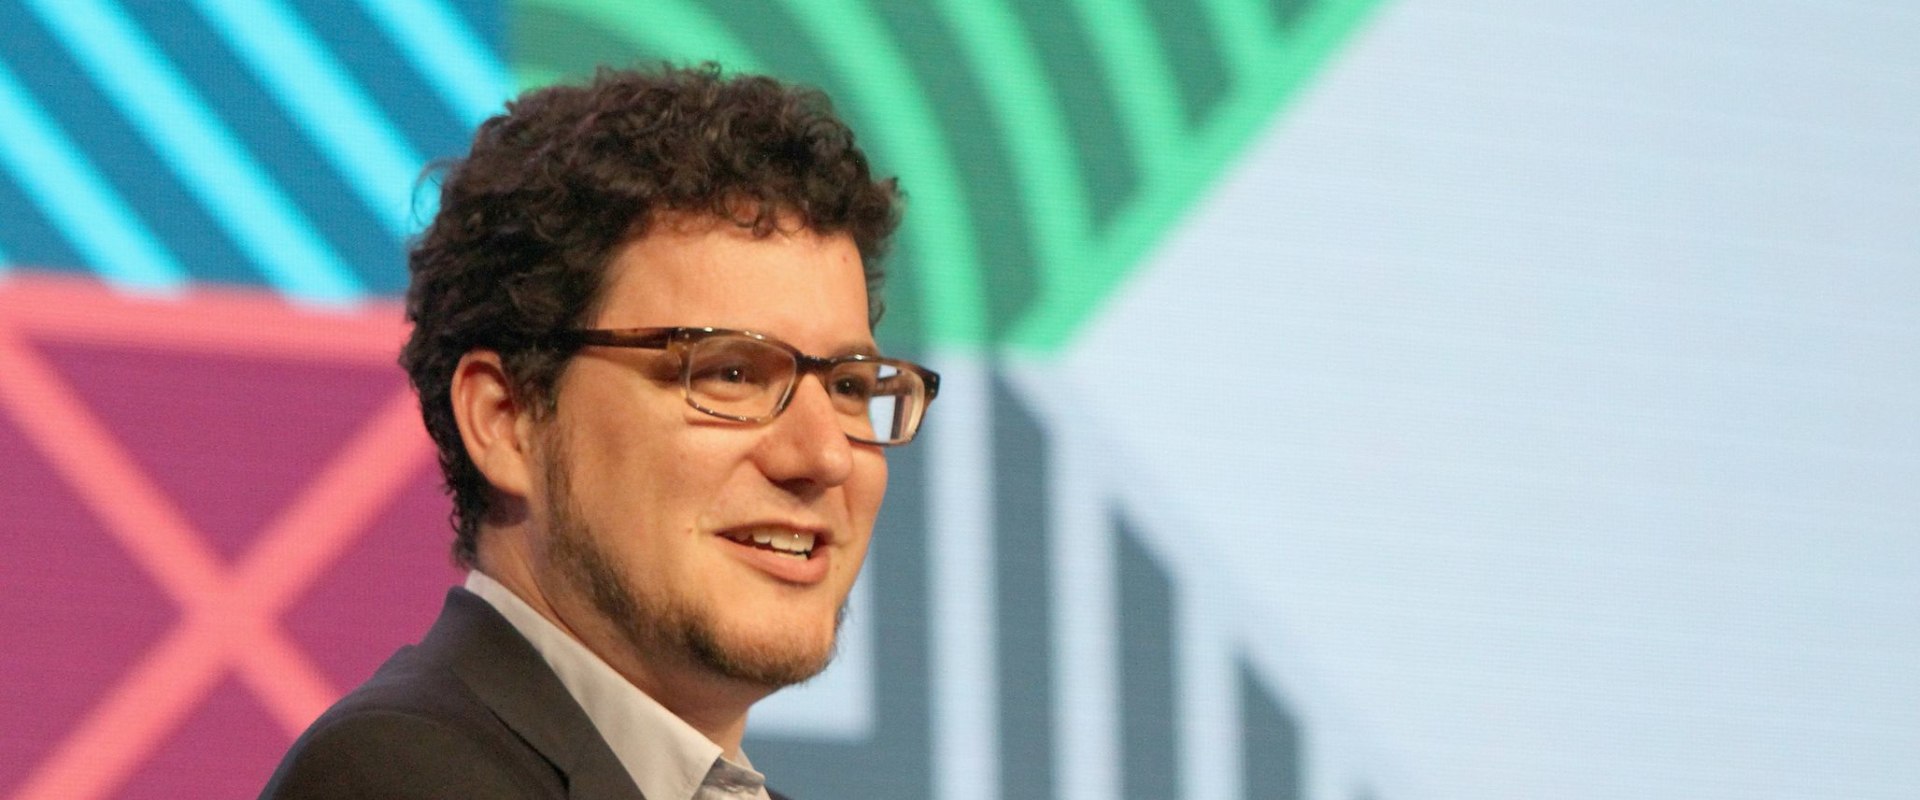 The Lean Startup by Eric Ries: A Comprehensive Look